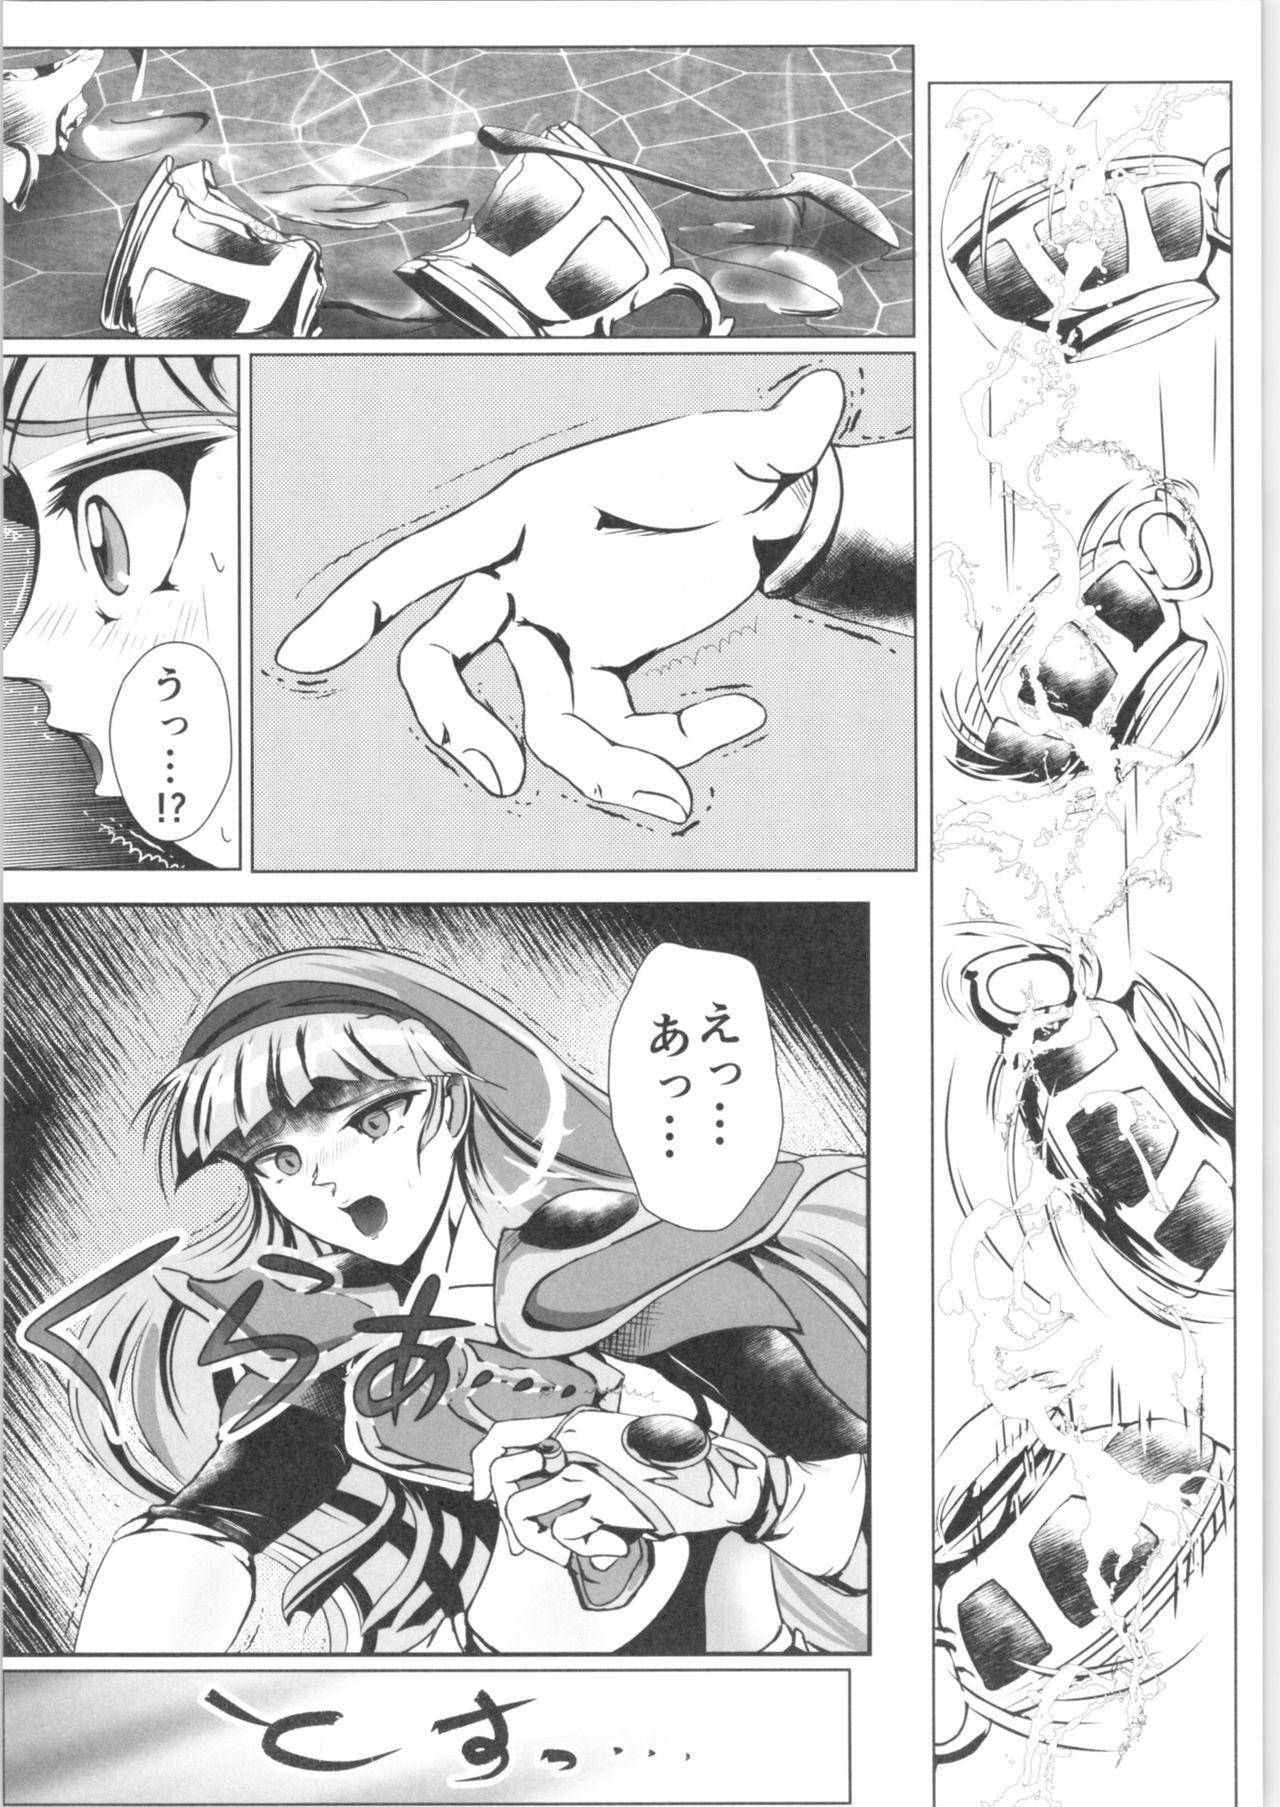 Double Penetration DARK TEMPEST U-03.01 - Magic knight rayearth Gay Ass Fucking - Page 3